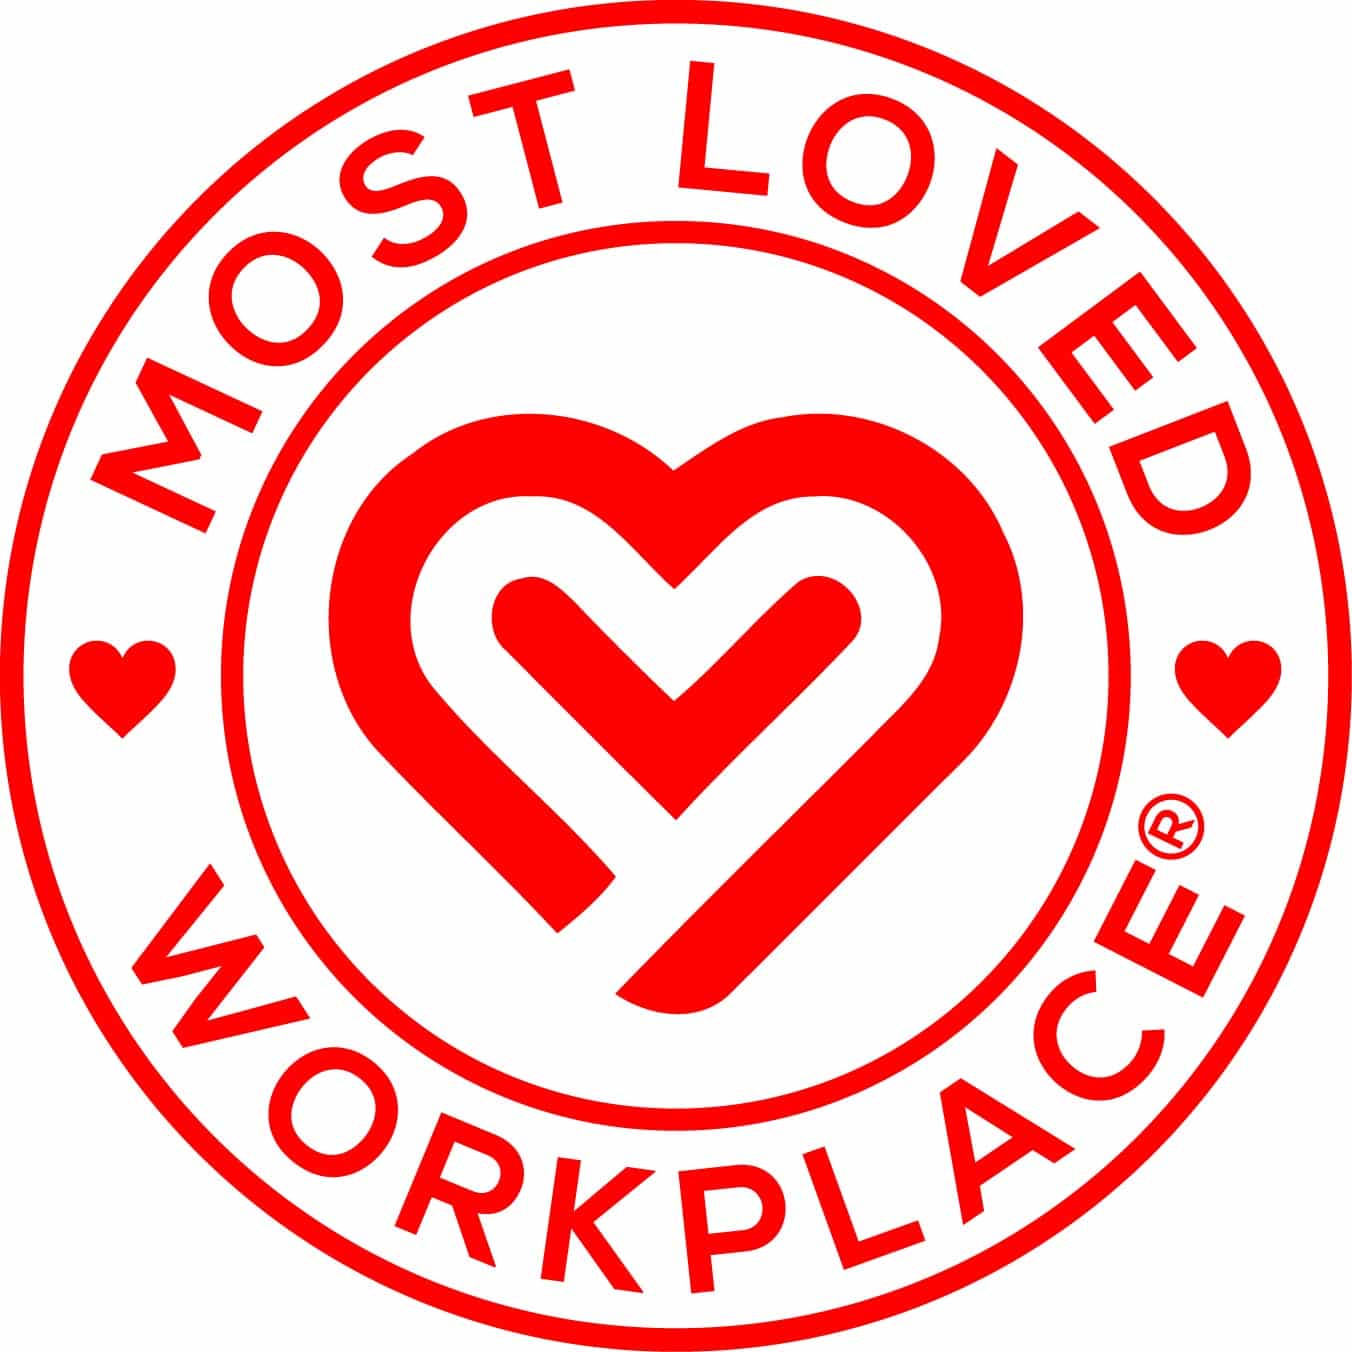 Newsroom - Most Loved Workplace®